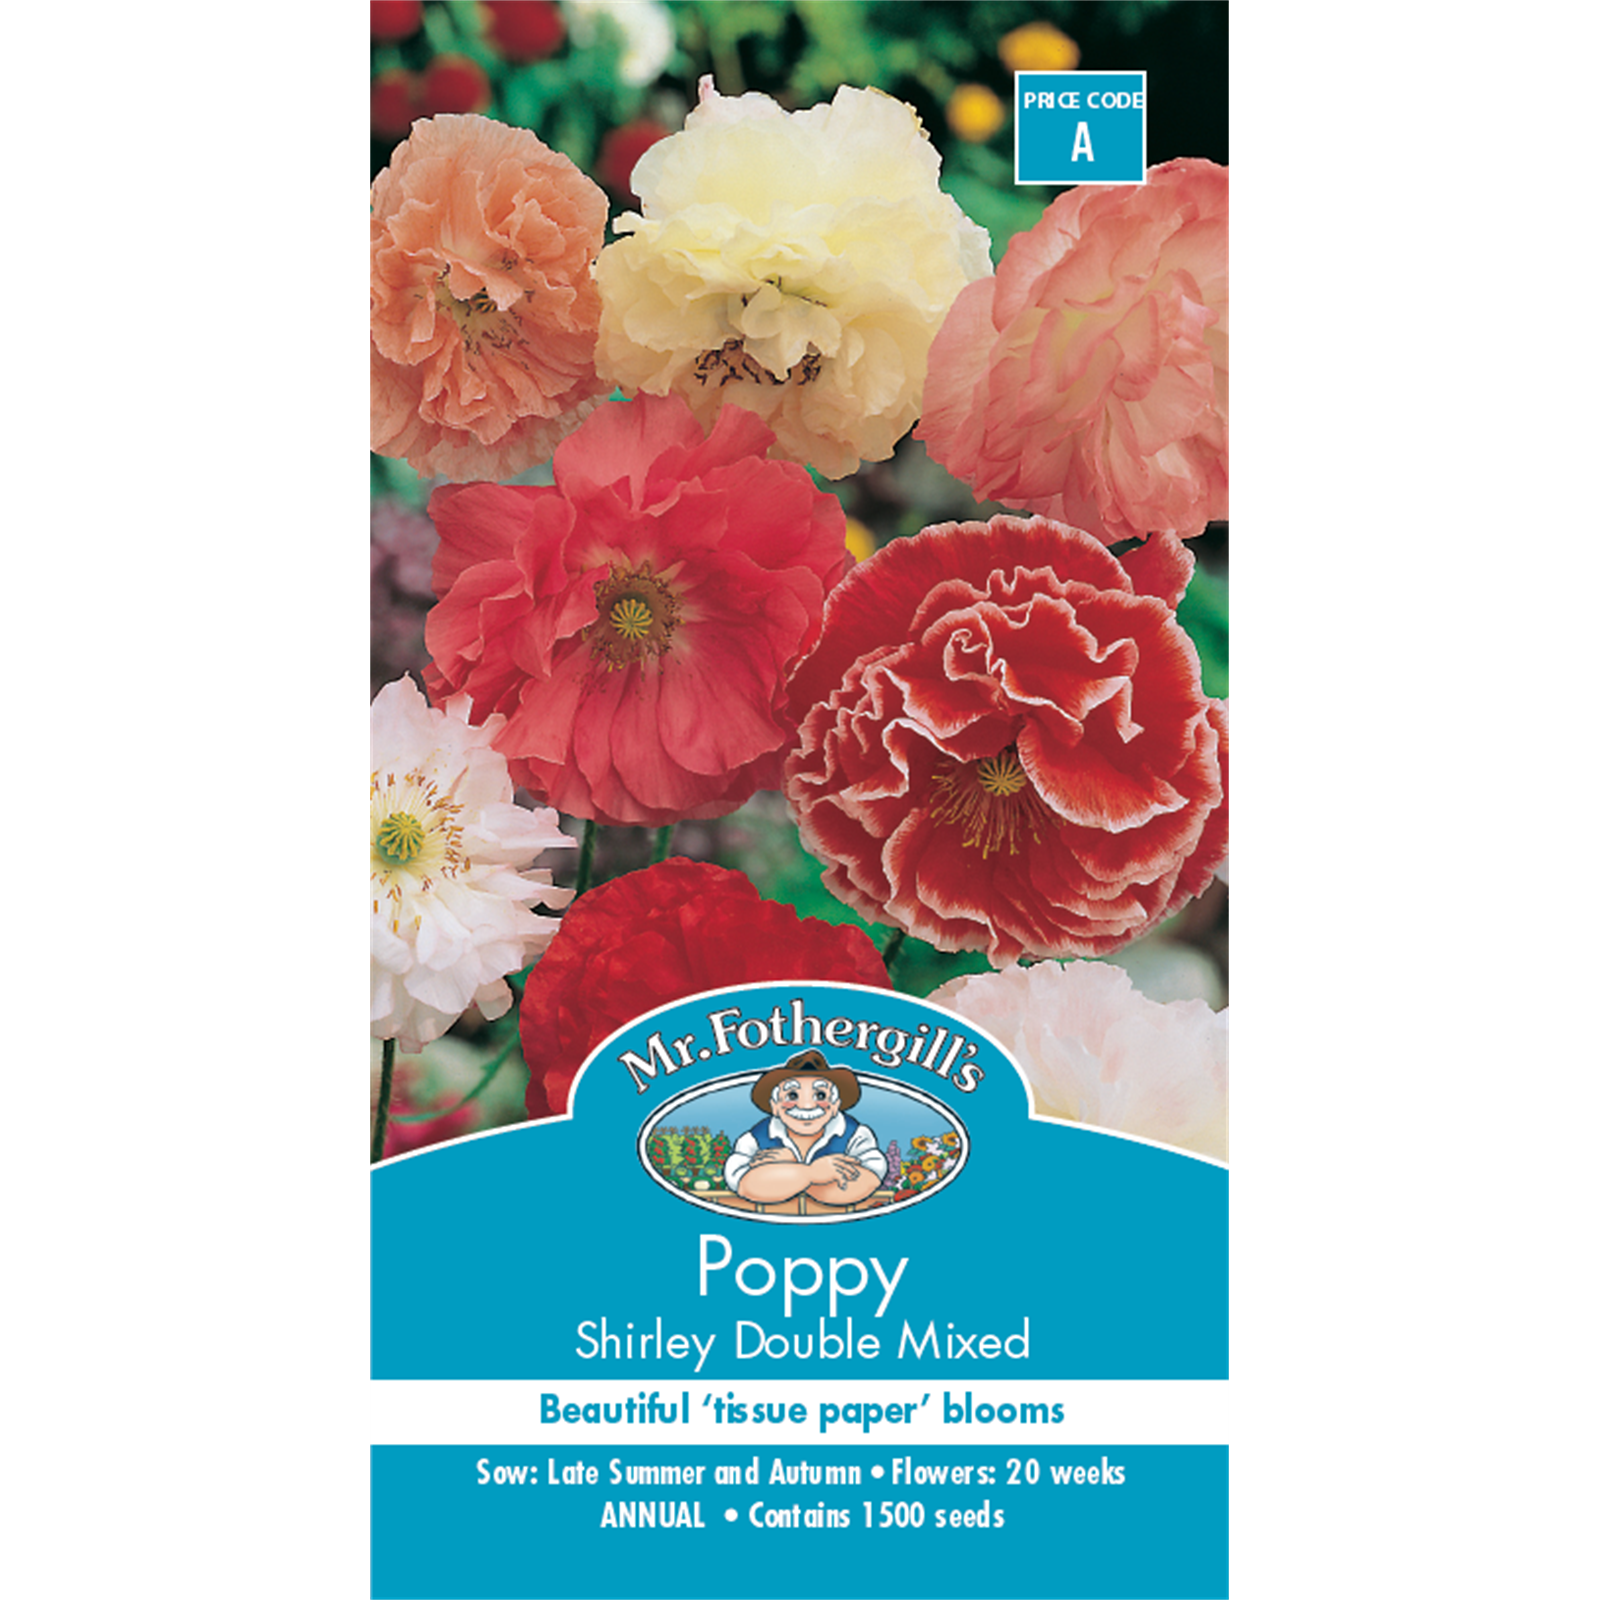 Mr Fothergill's Poppy Shirley Double Mixed Flower Seeds